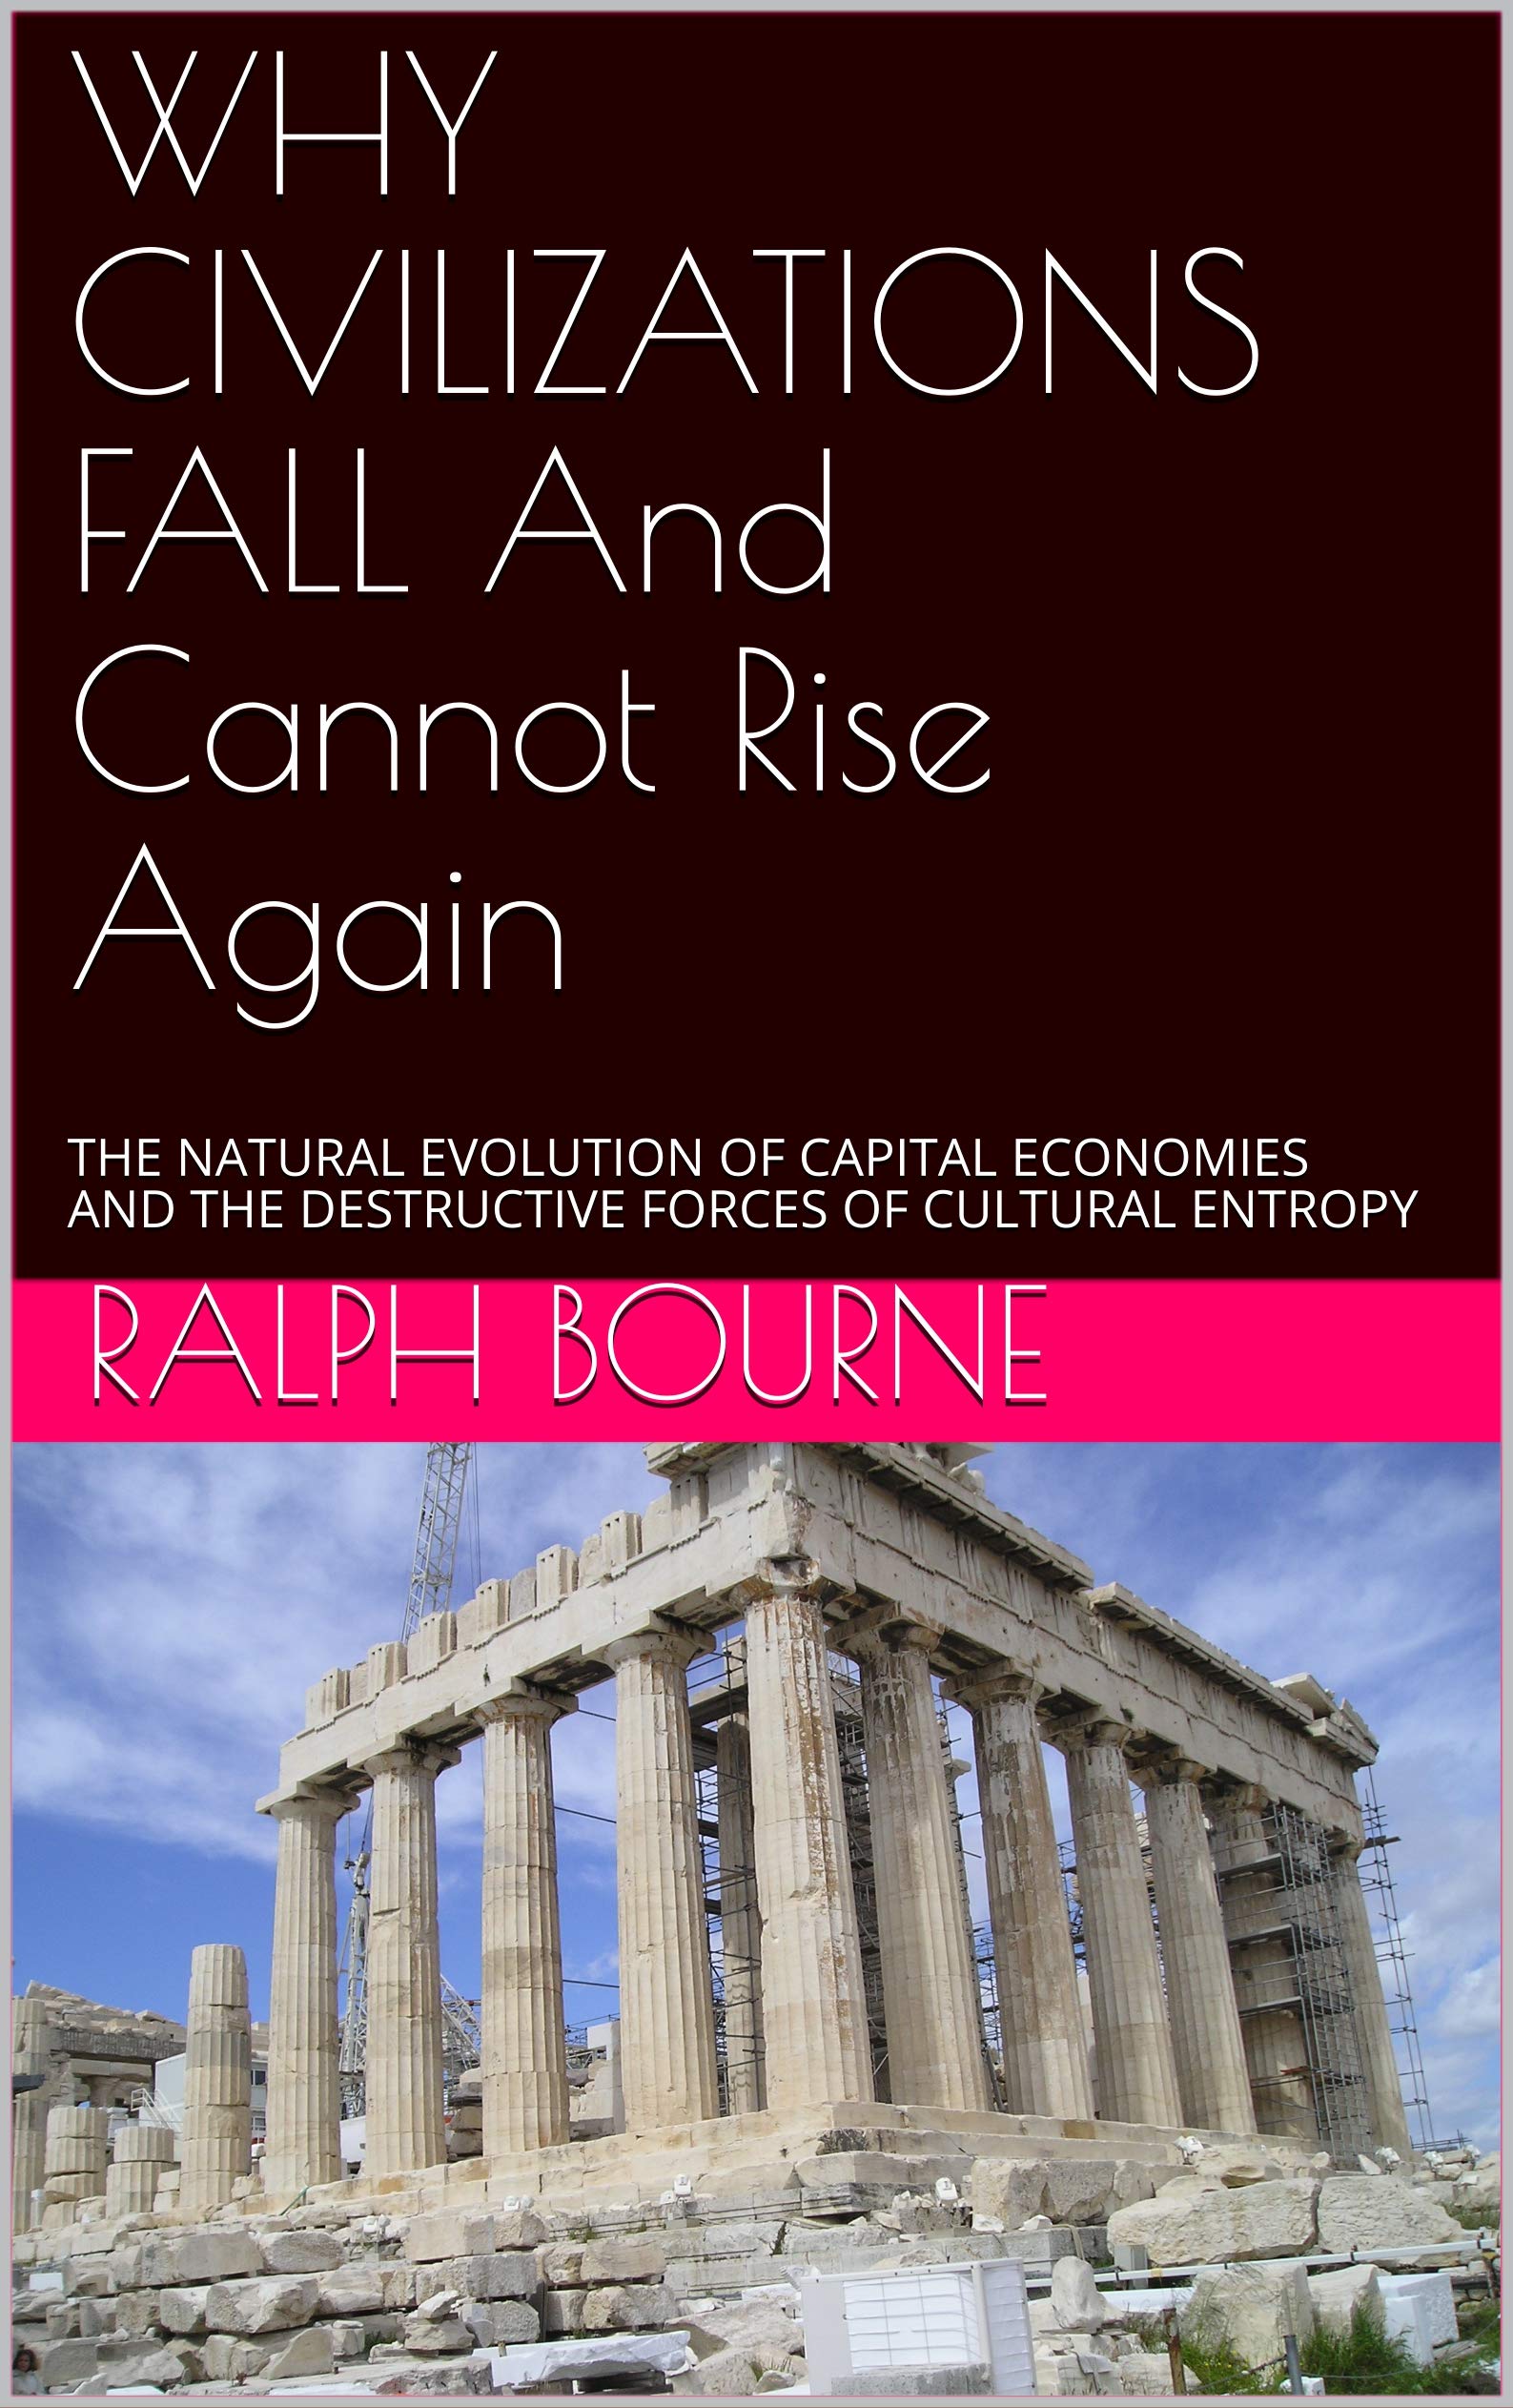 WHY CIVILIZATIONS FALL And Cannot Rise Again: THE NATURAL EVOLUTION OF CAPITAL ECONOMIES AND THE DESTRUCTIVE FORCES OF CULTURAL ENTROPY (Ralph Bourne Book 1)